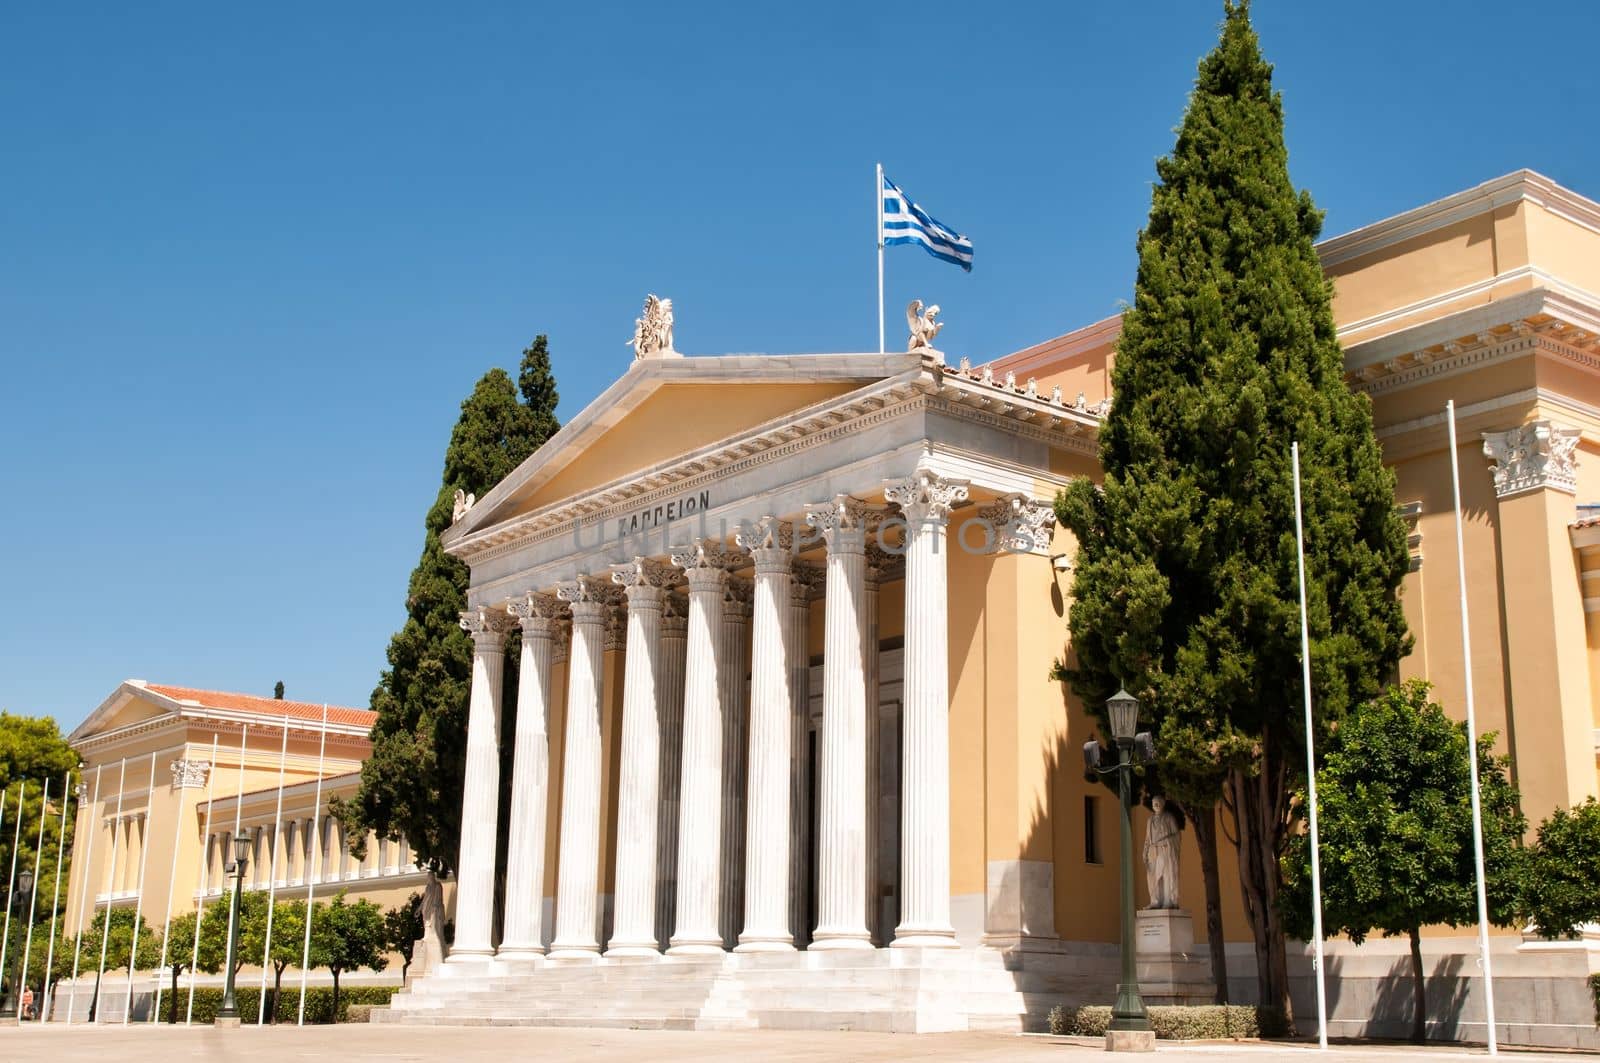 The Zappeion building in Athens, Greece